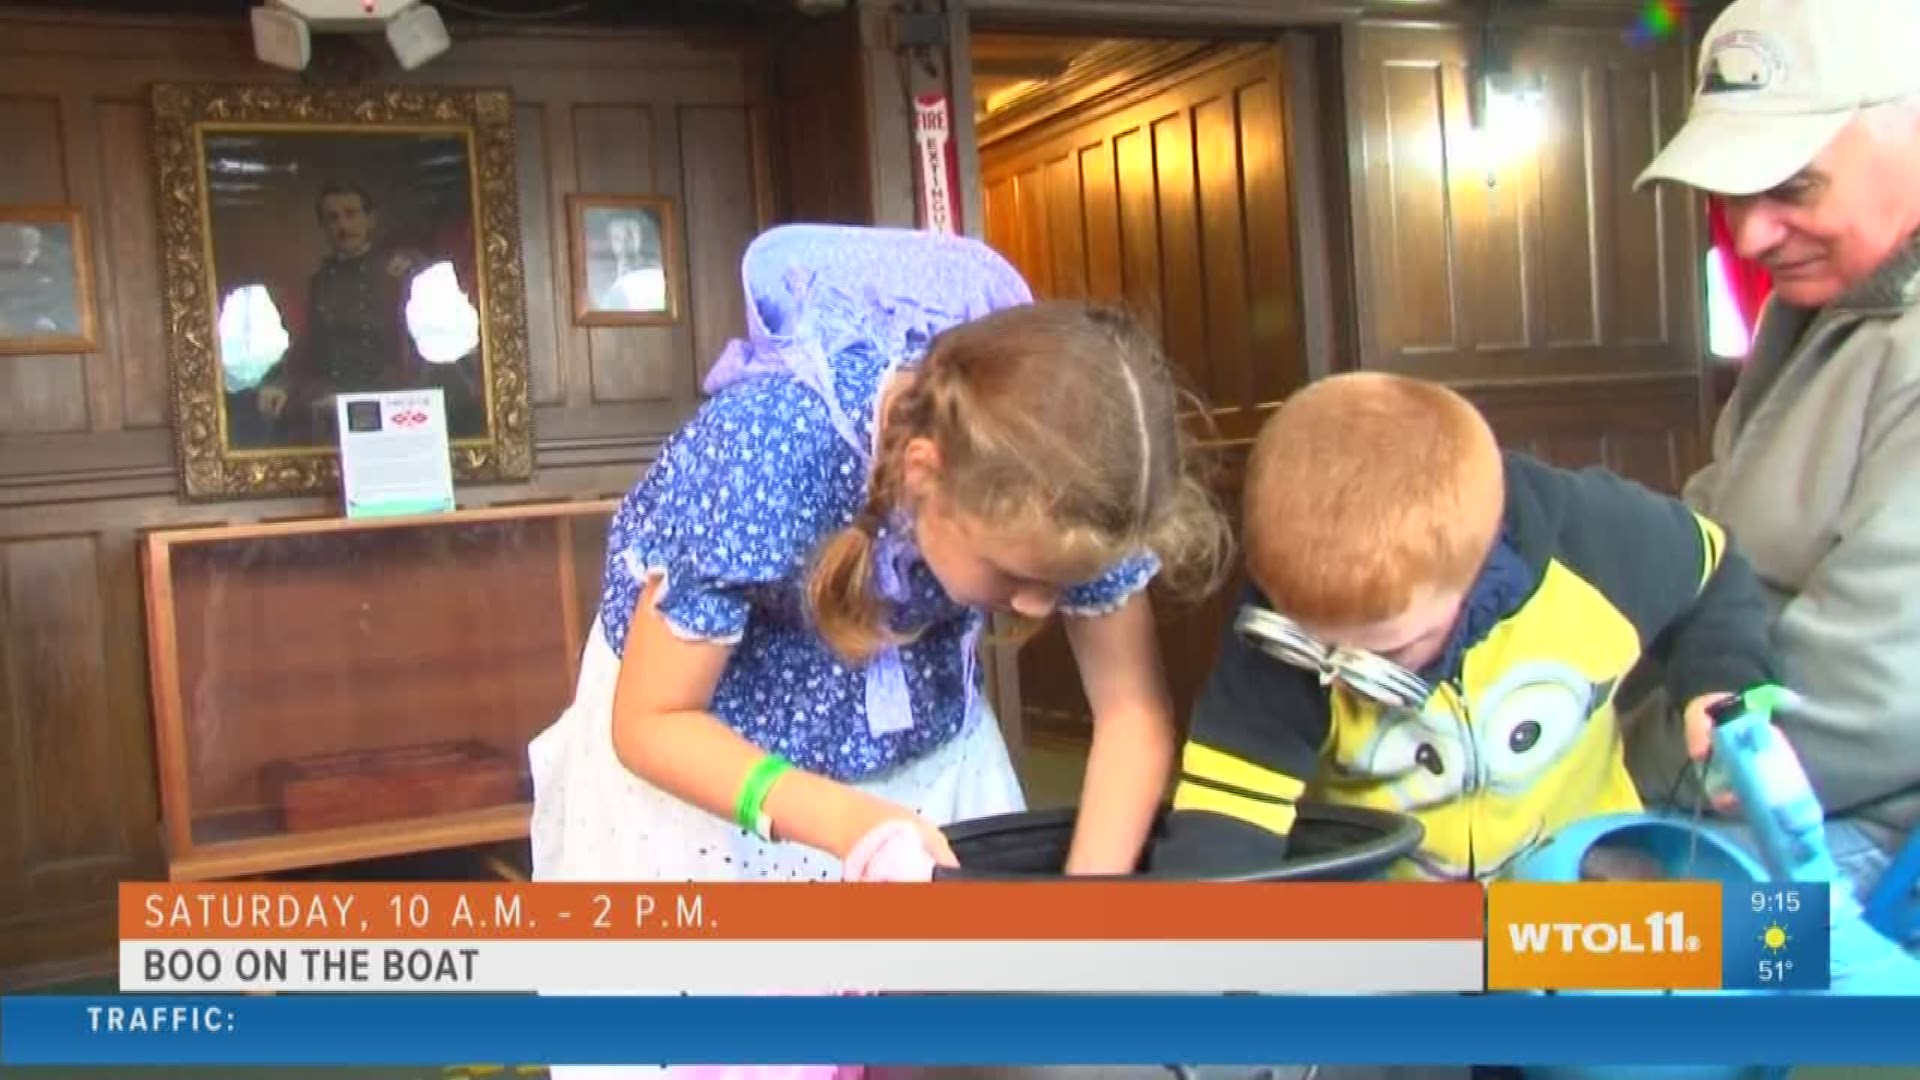 Trick-or-treating - on a boat? You can do that at Boo on the Boat at the National Museum of the Great Lakes!